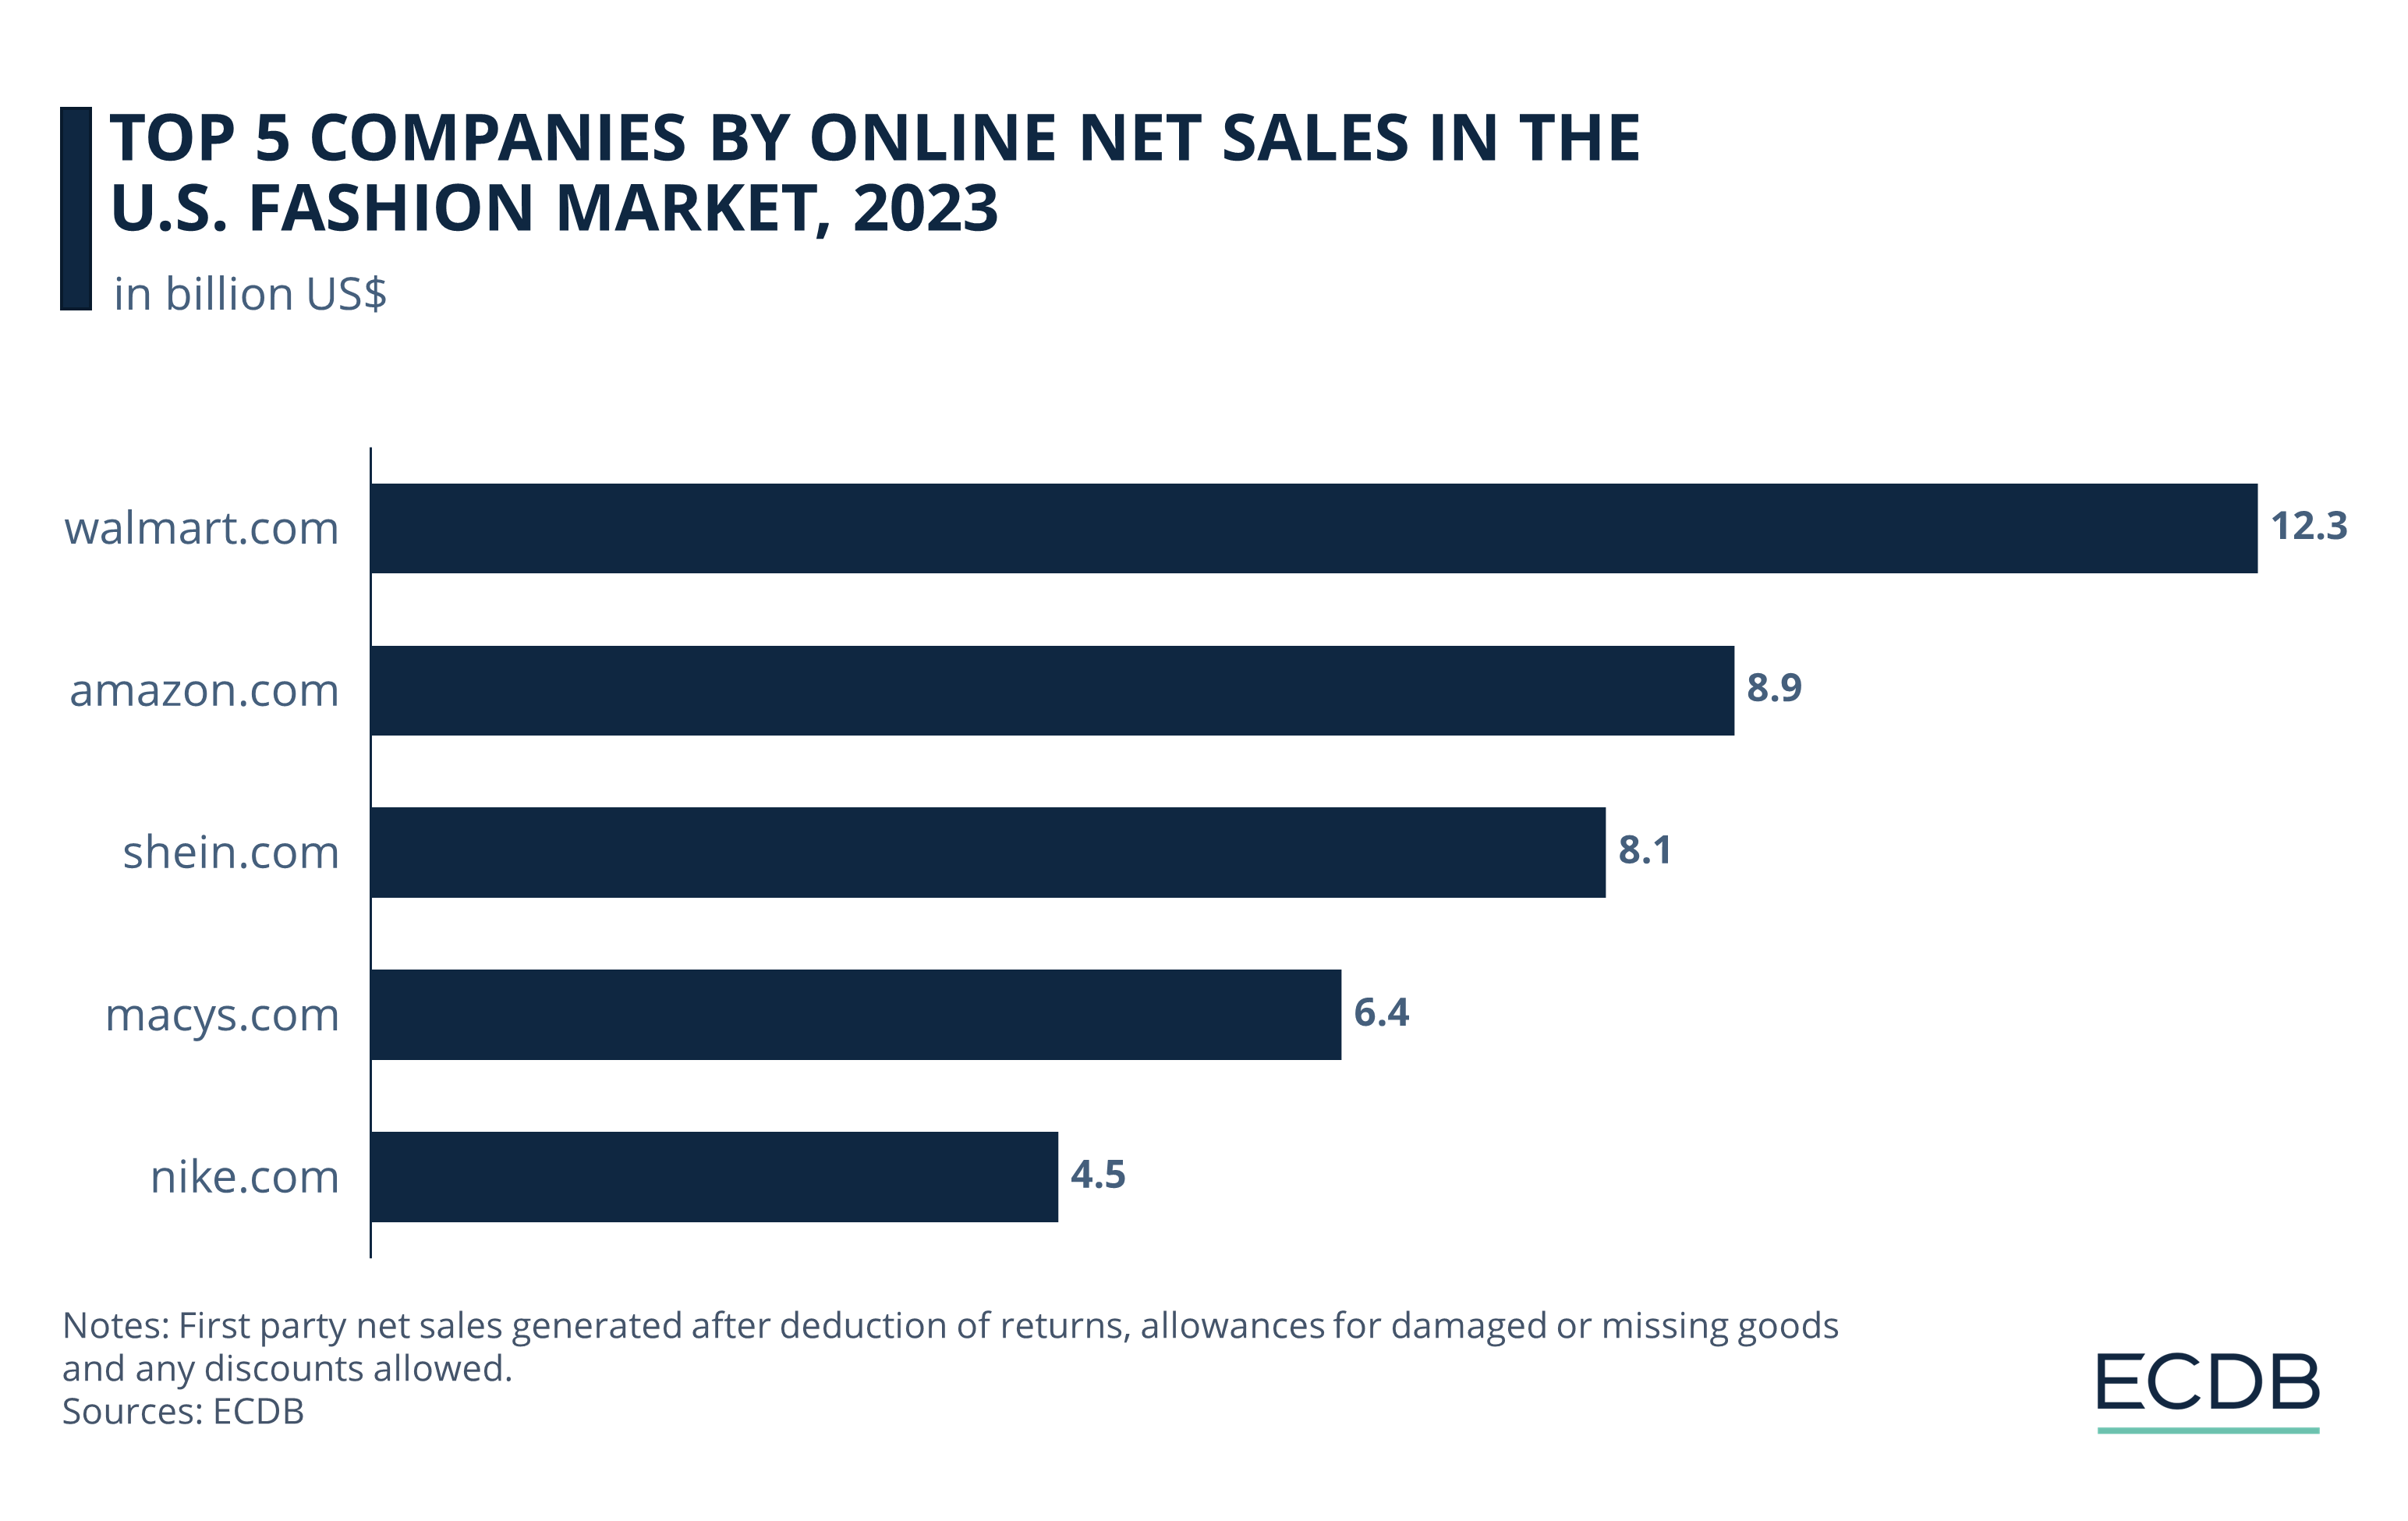 Top 5 Companies by Online Net Sales in the U.S. Fashion Market, 2023